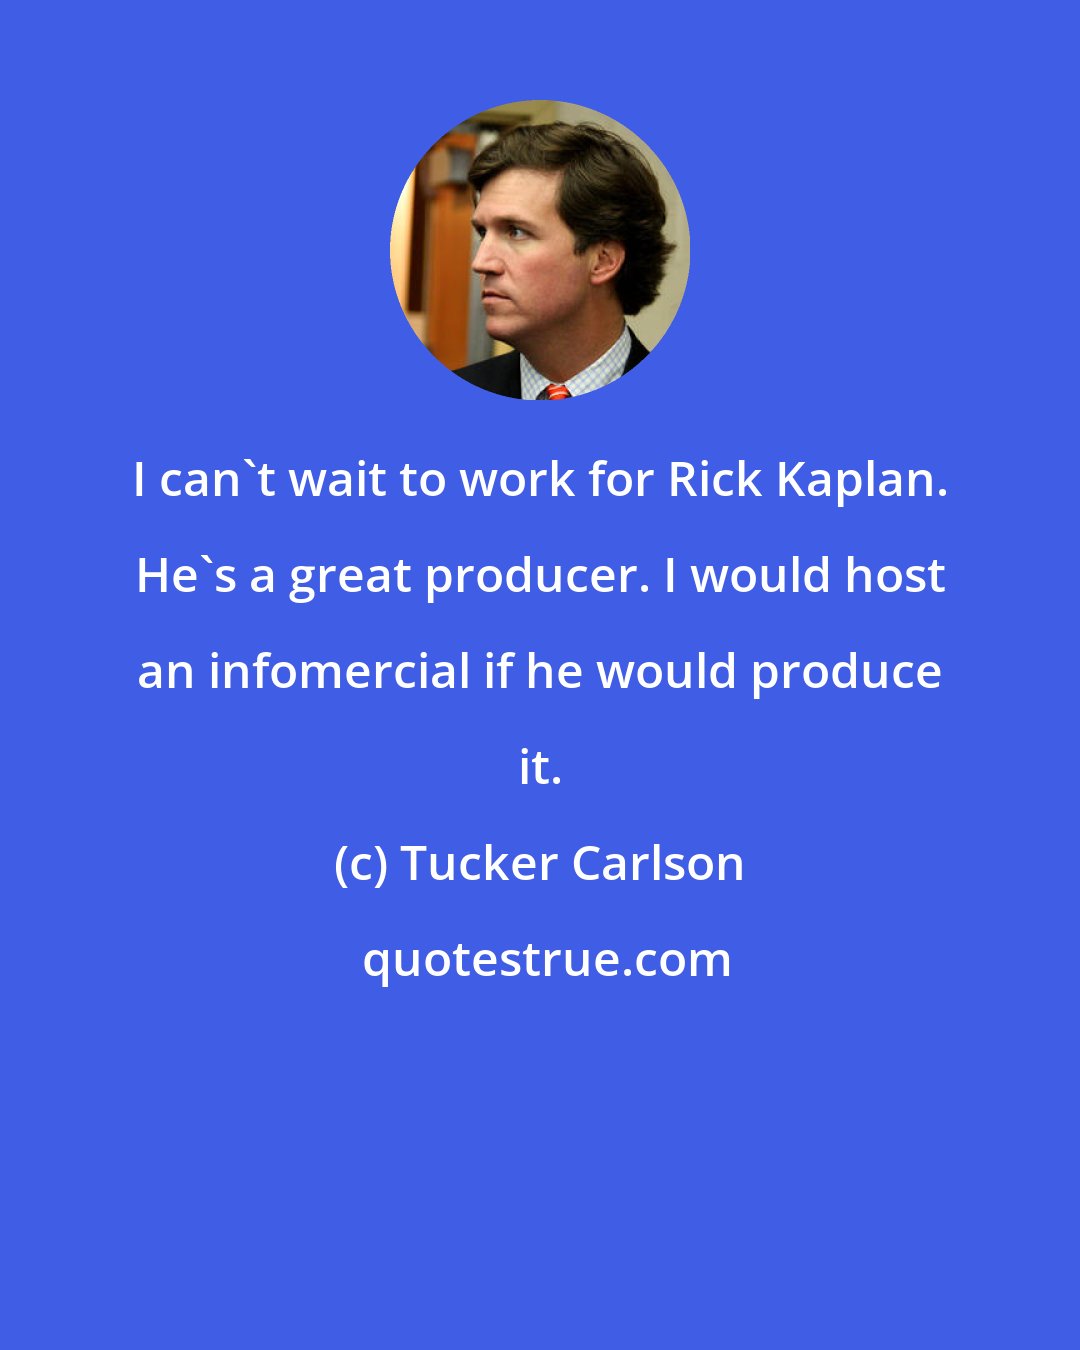 Tucker Carlson: I can't wait to work for Rick Kaplan. He's a great producer. I would host an infomercial if he would produce it.